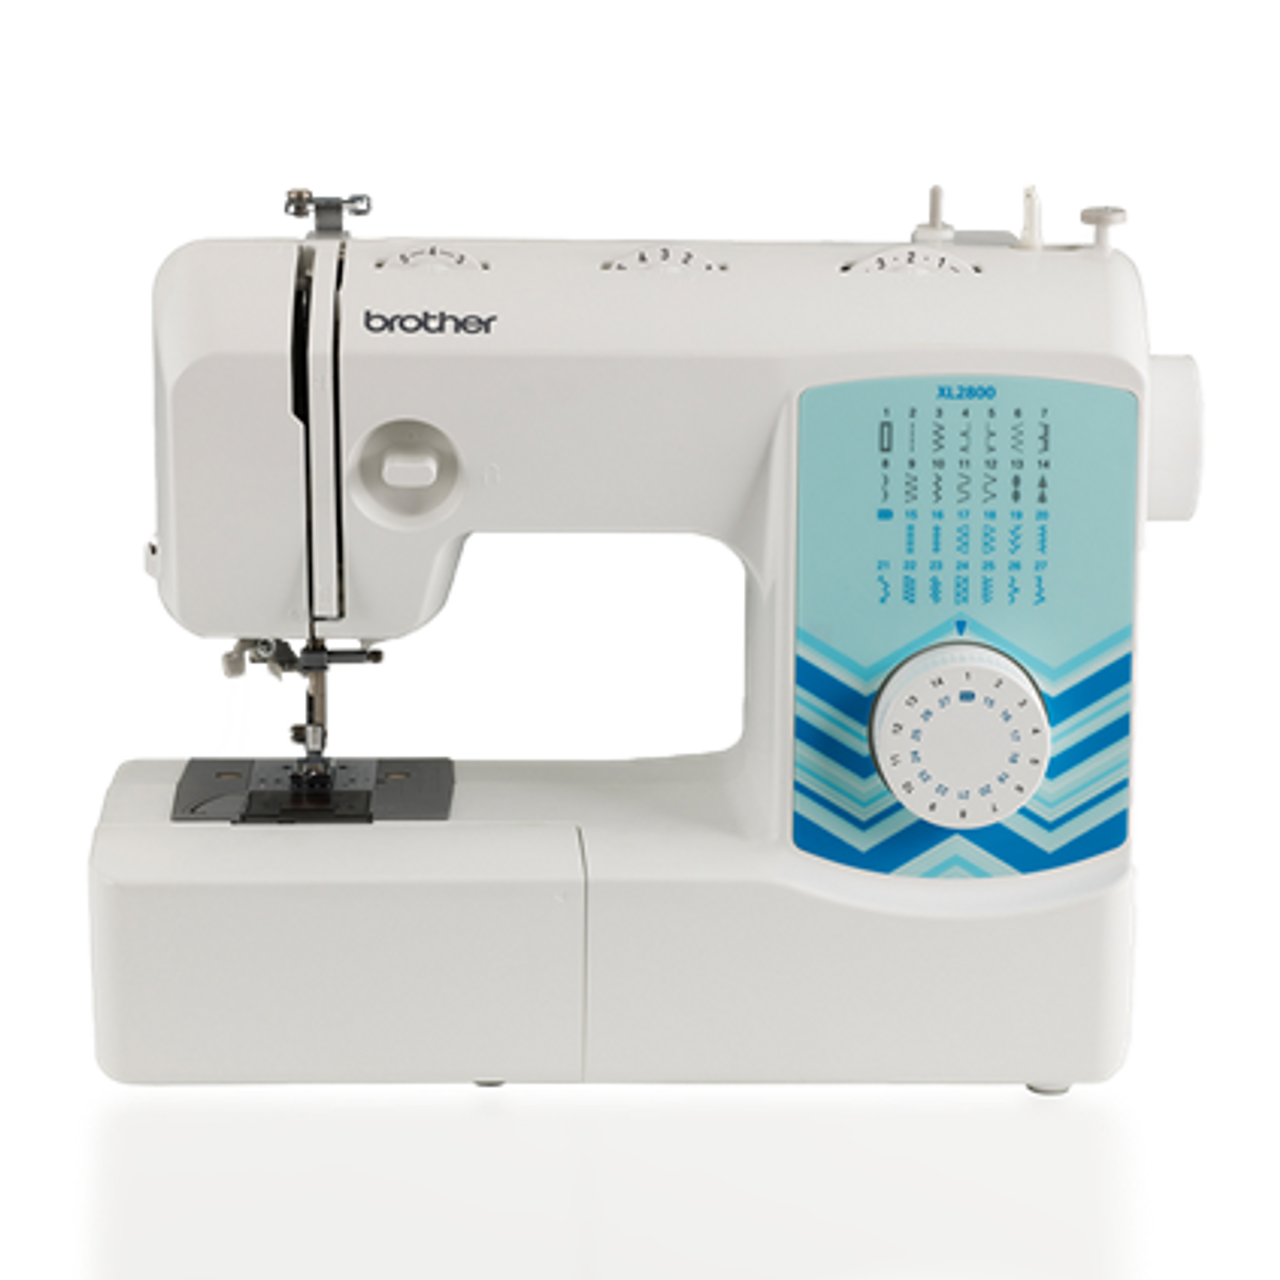 Brother ST531HD Strong & Touch Sewing Machine Overview 